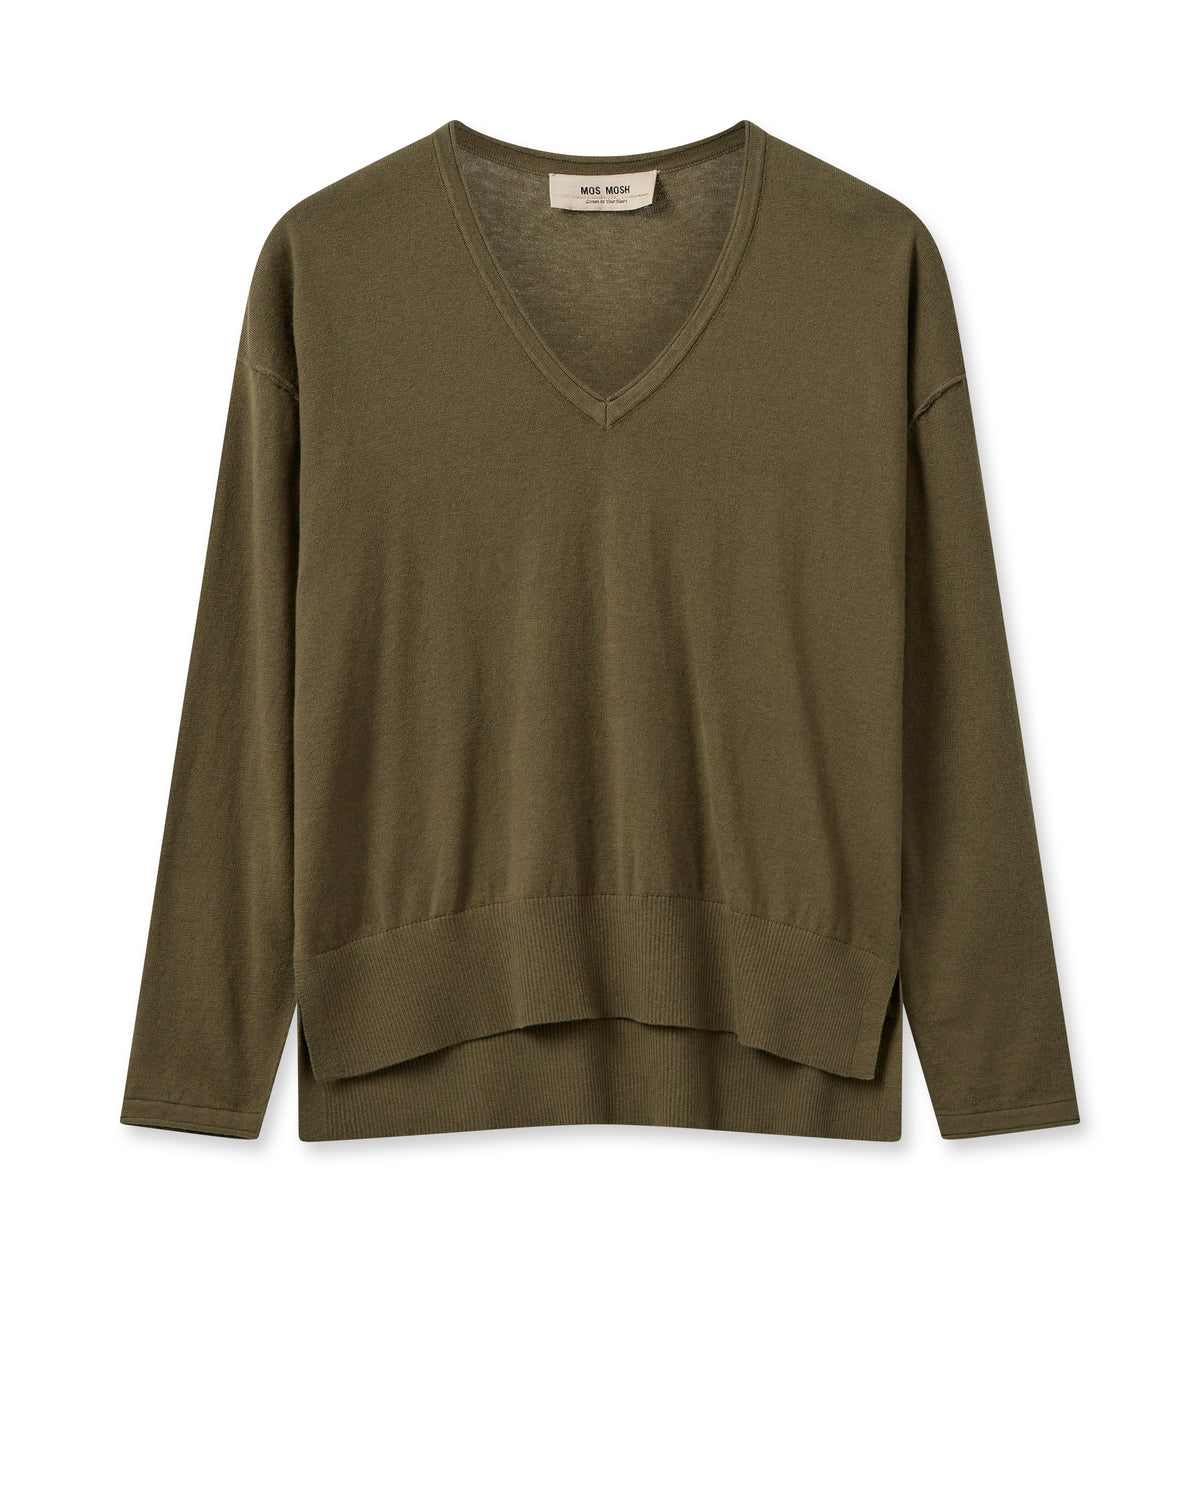 Khaki lightweight V neck jumper with long sleeves and dipped hem with side splits